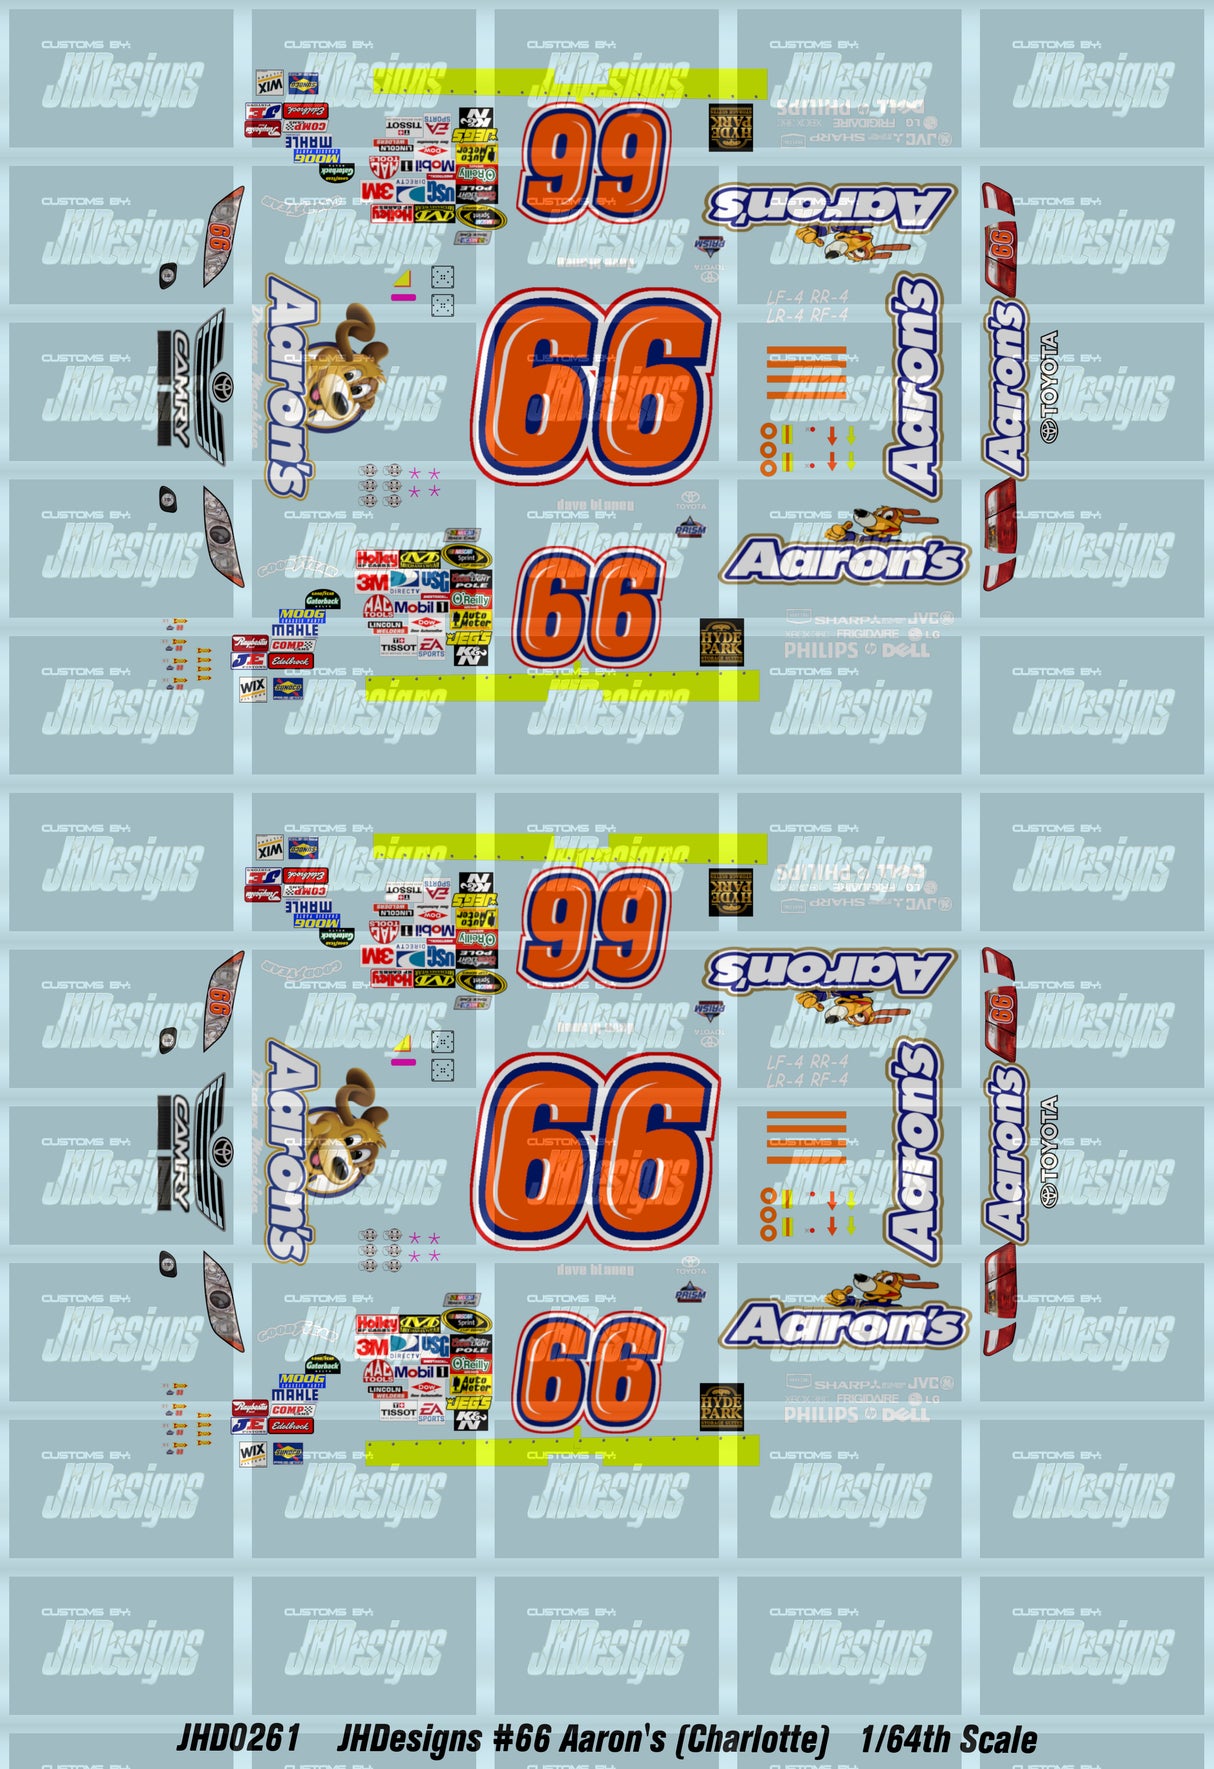 JH Designs Dave Blaney 2009 CUP #66 Aaron's Rental Center (Charlotte Race) 1:64 Racecar Decal Set